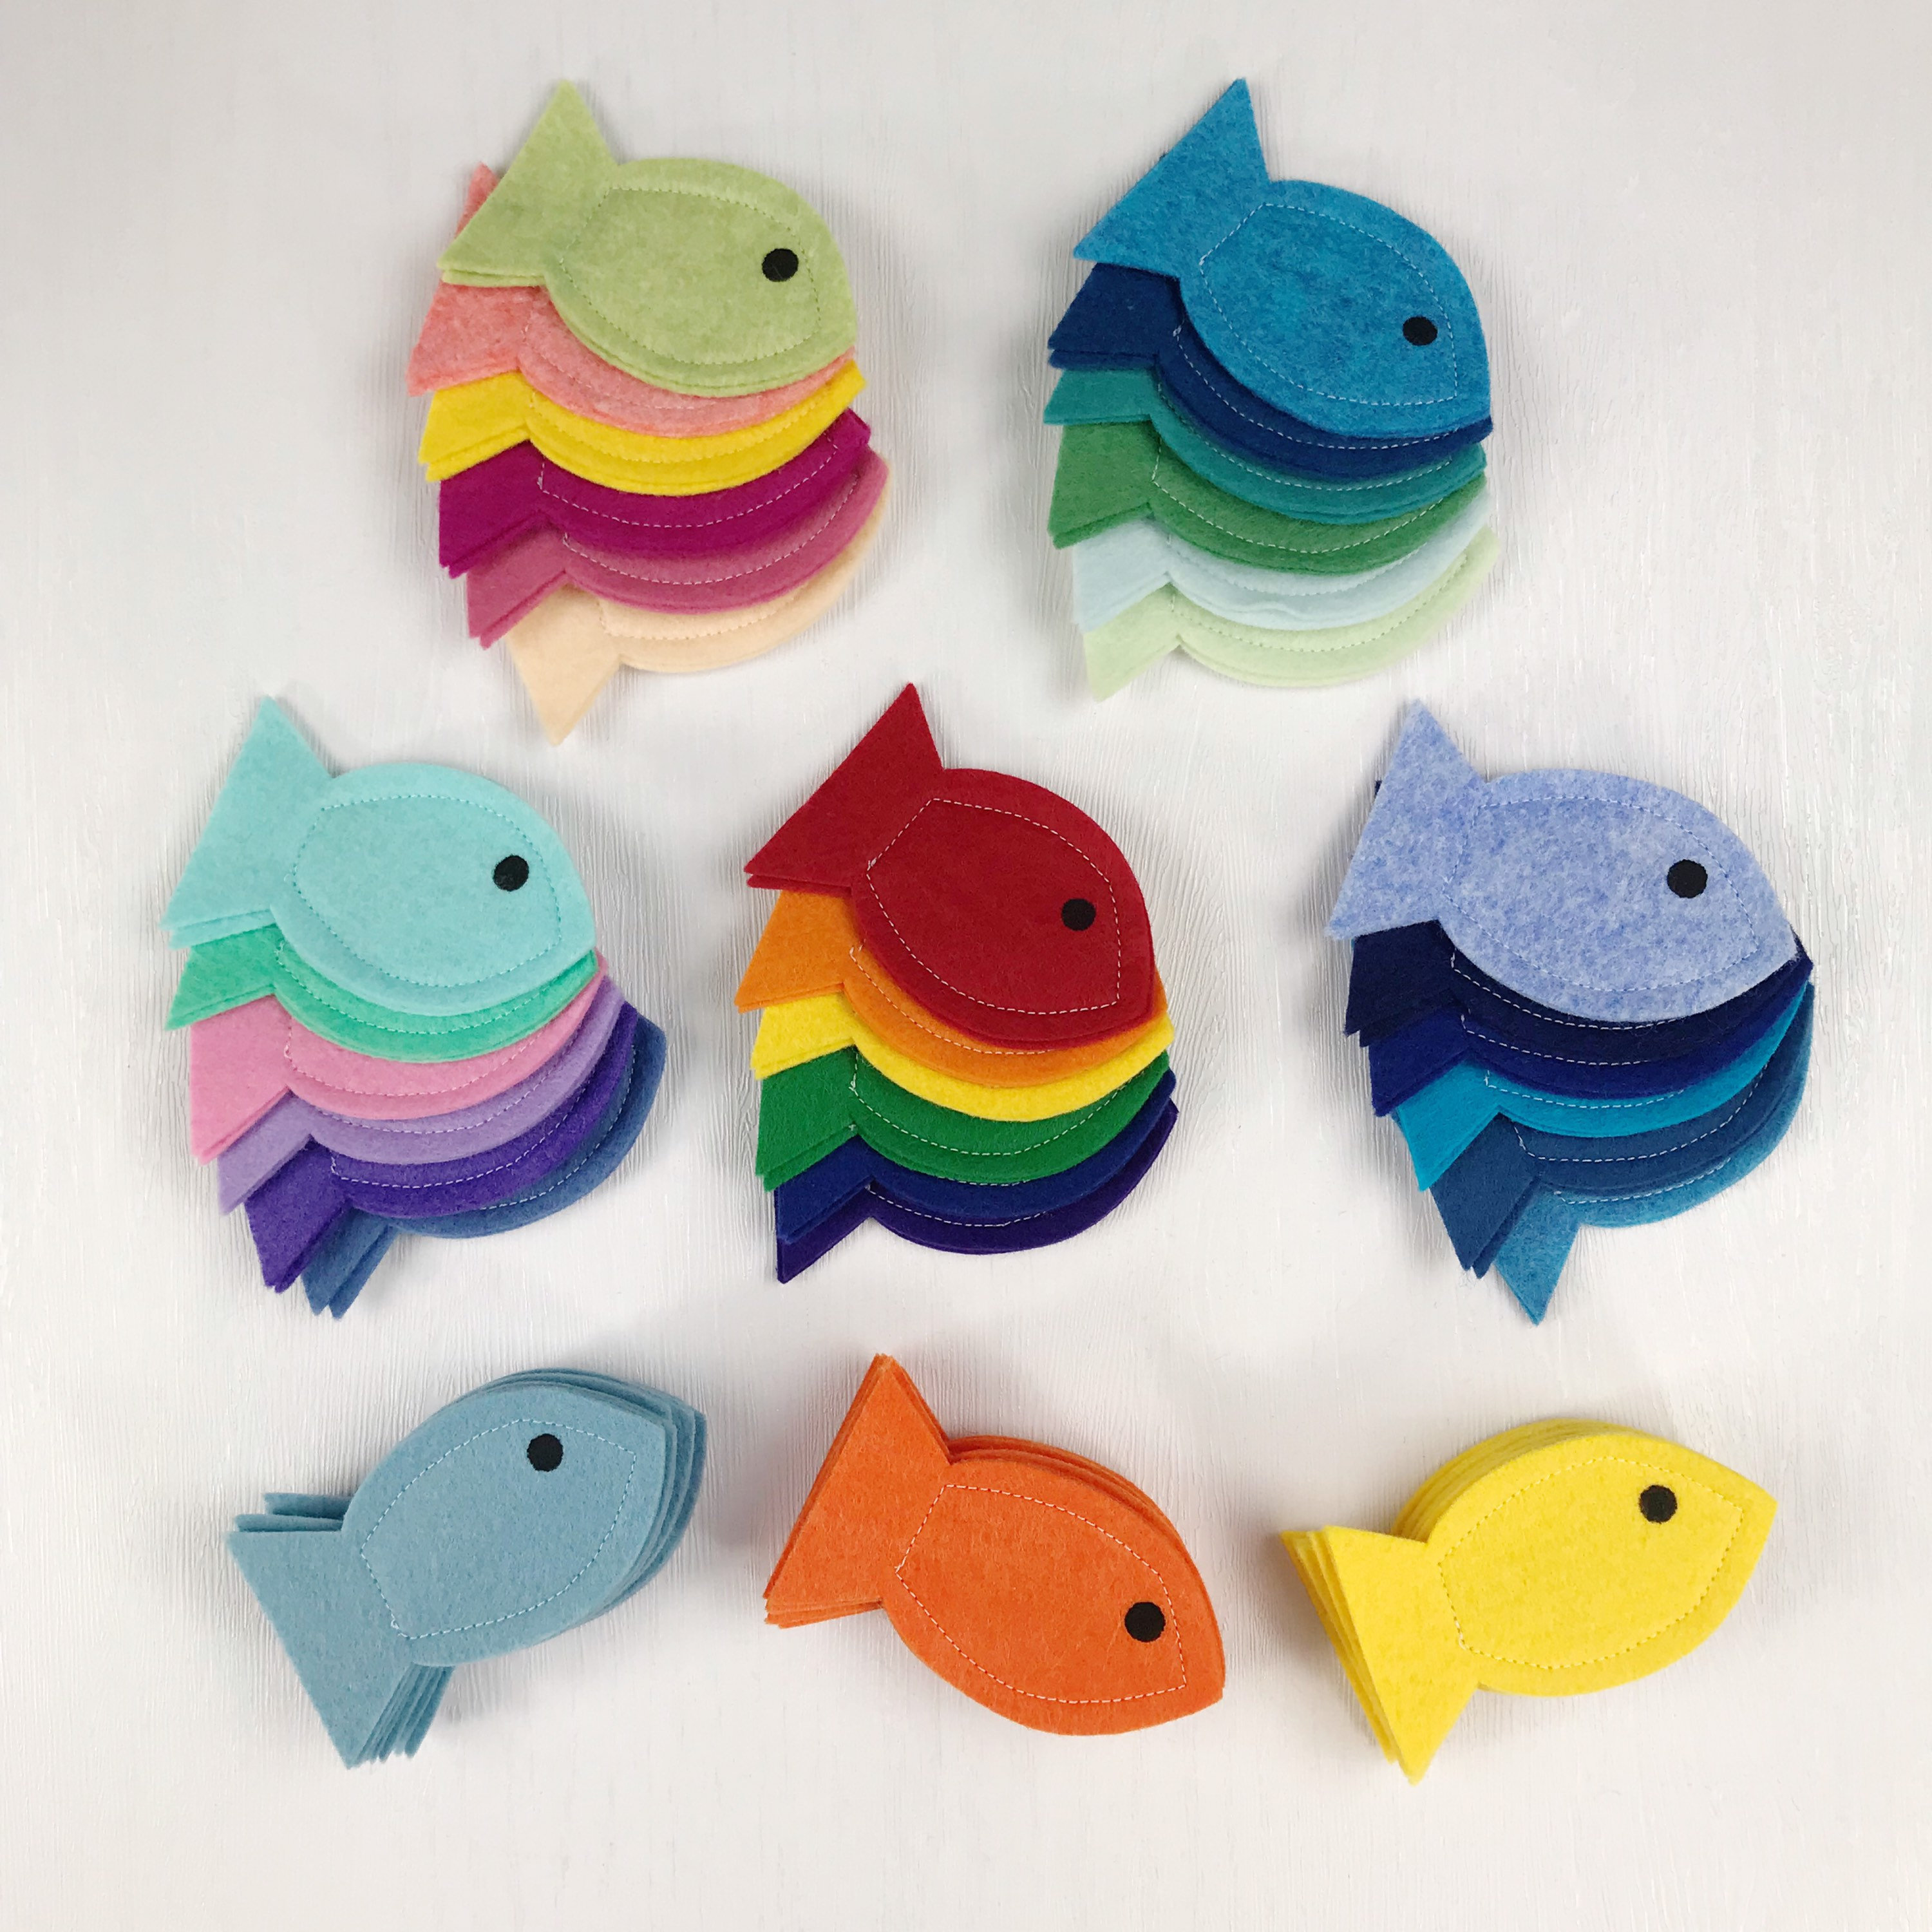 Extra Fish for Kids Fishing Game, Felt Fish Used for Magnetic